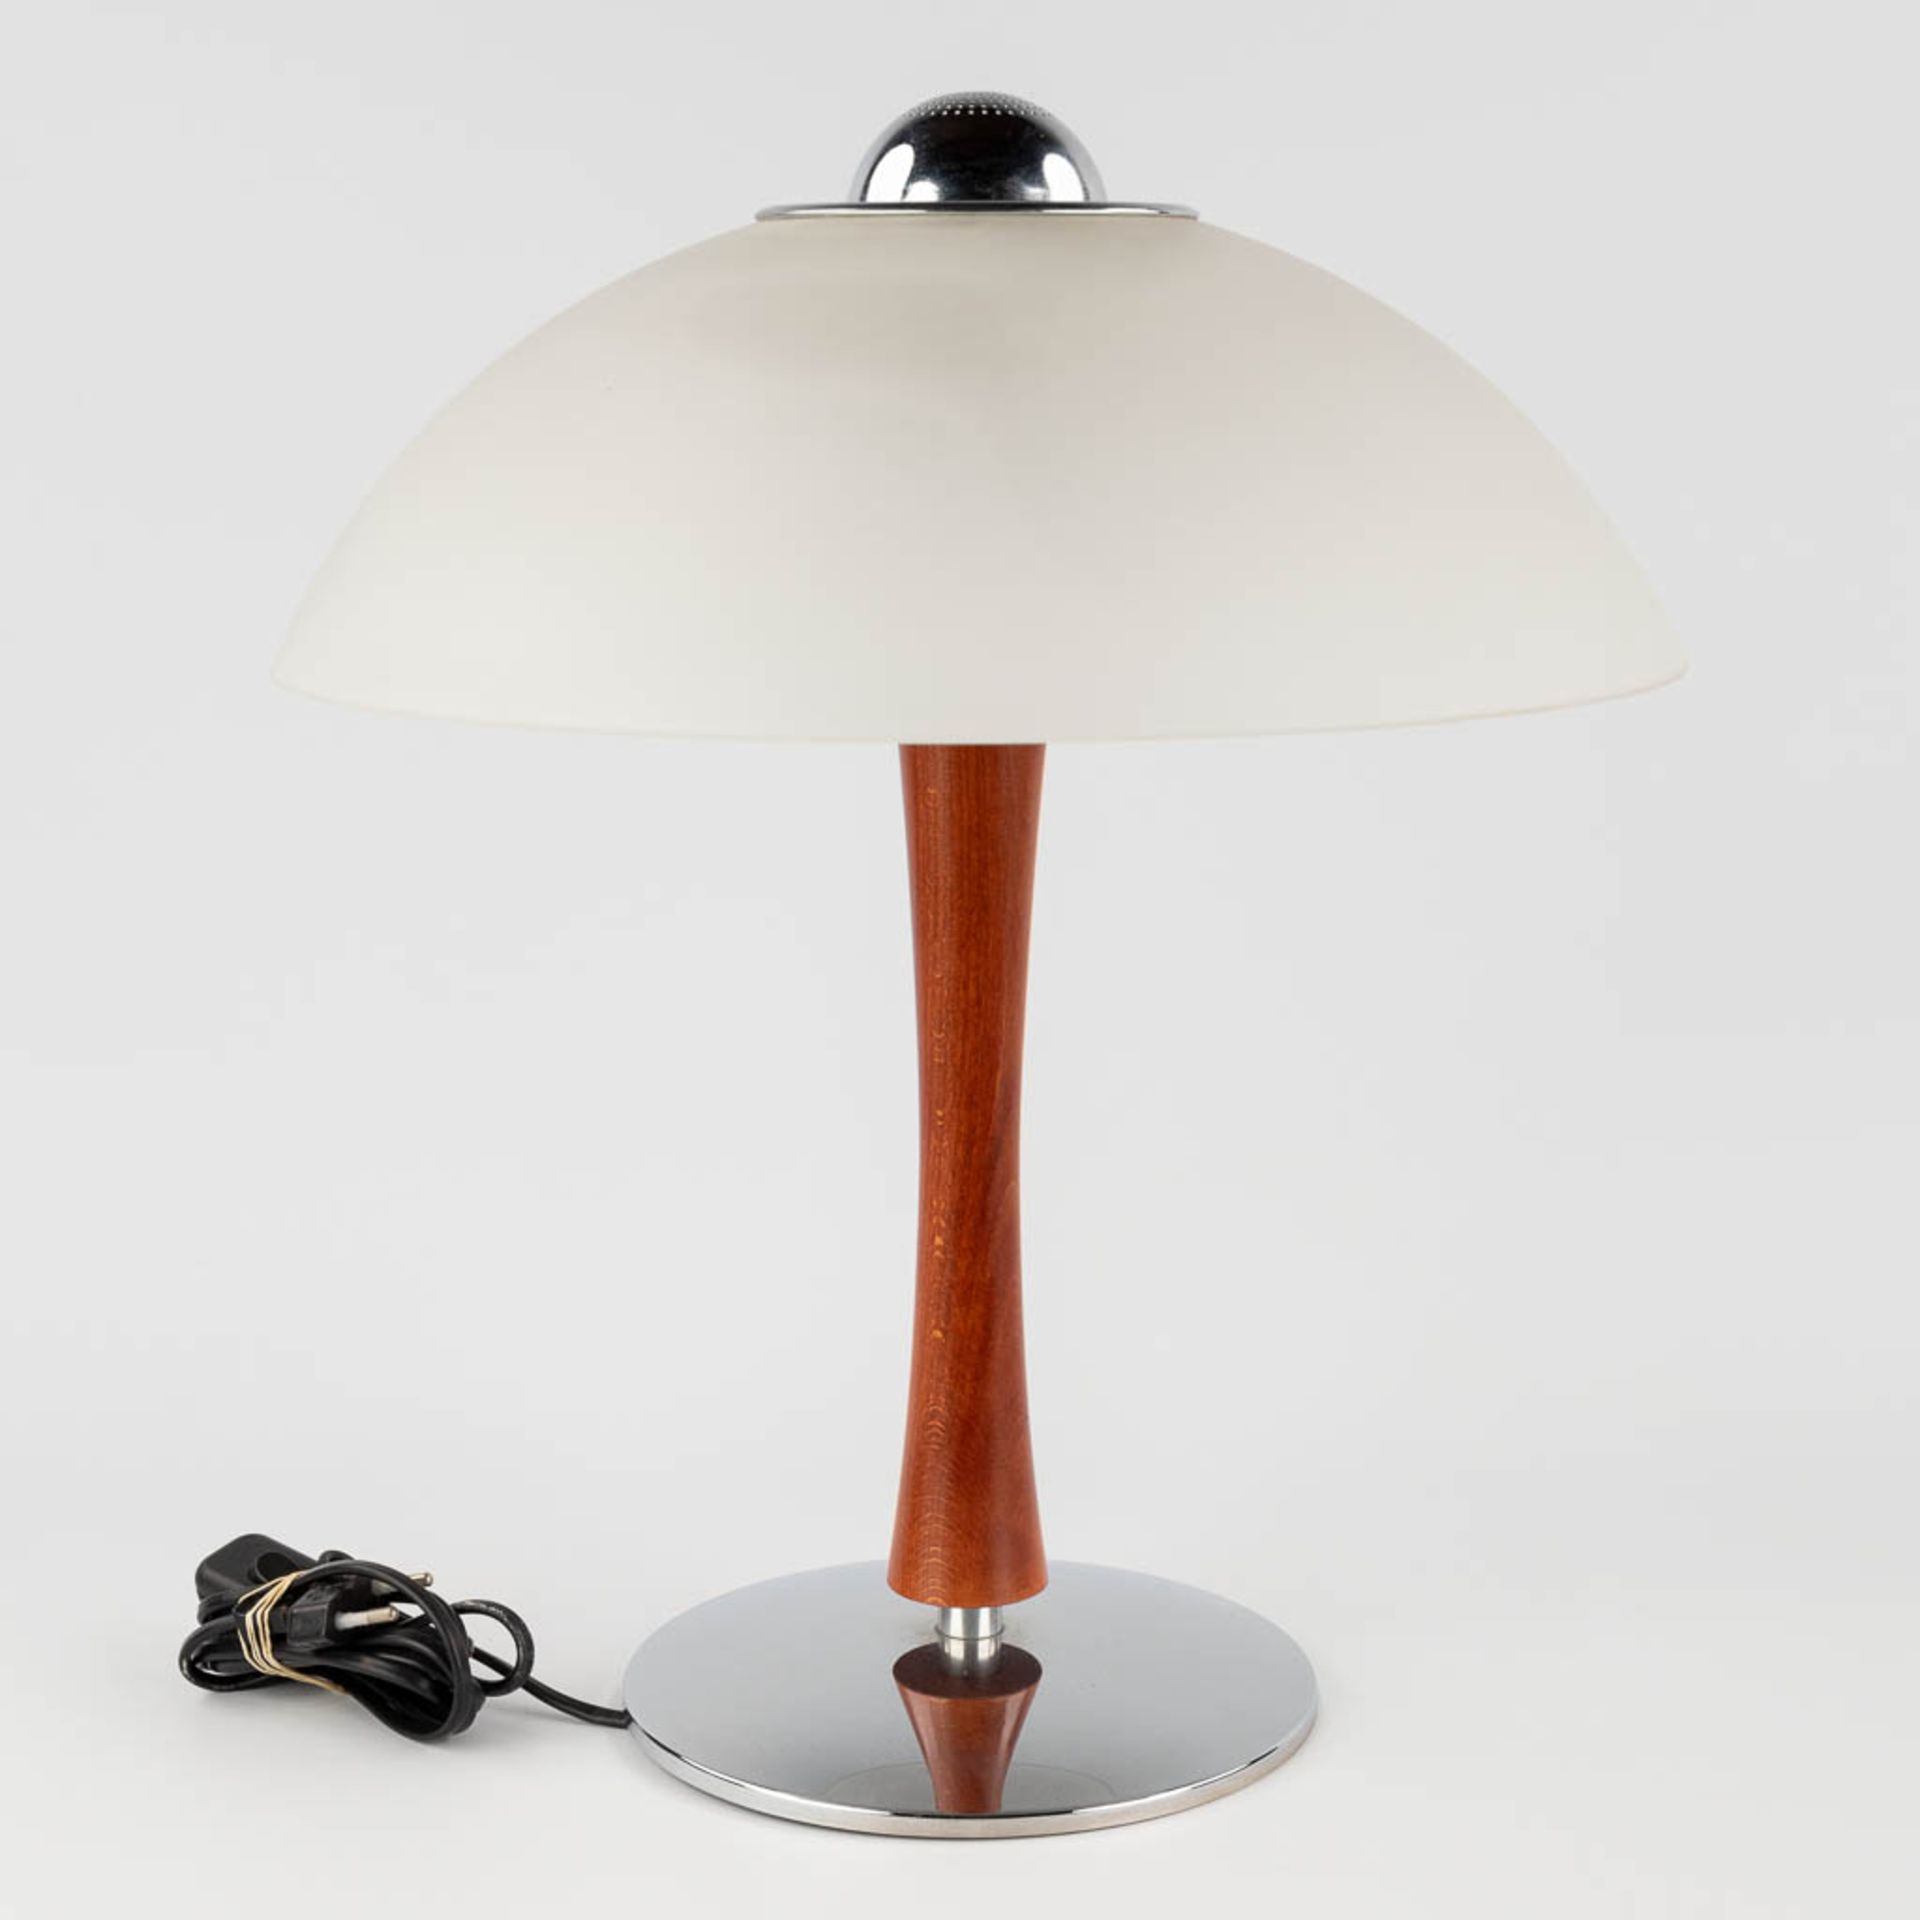 Artemide 'Arcadia' a table lamp. Glass and wood. 20th C. (H:43 x D:37 cm) - Image 6 of 12